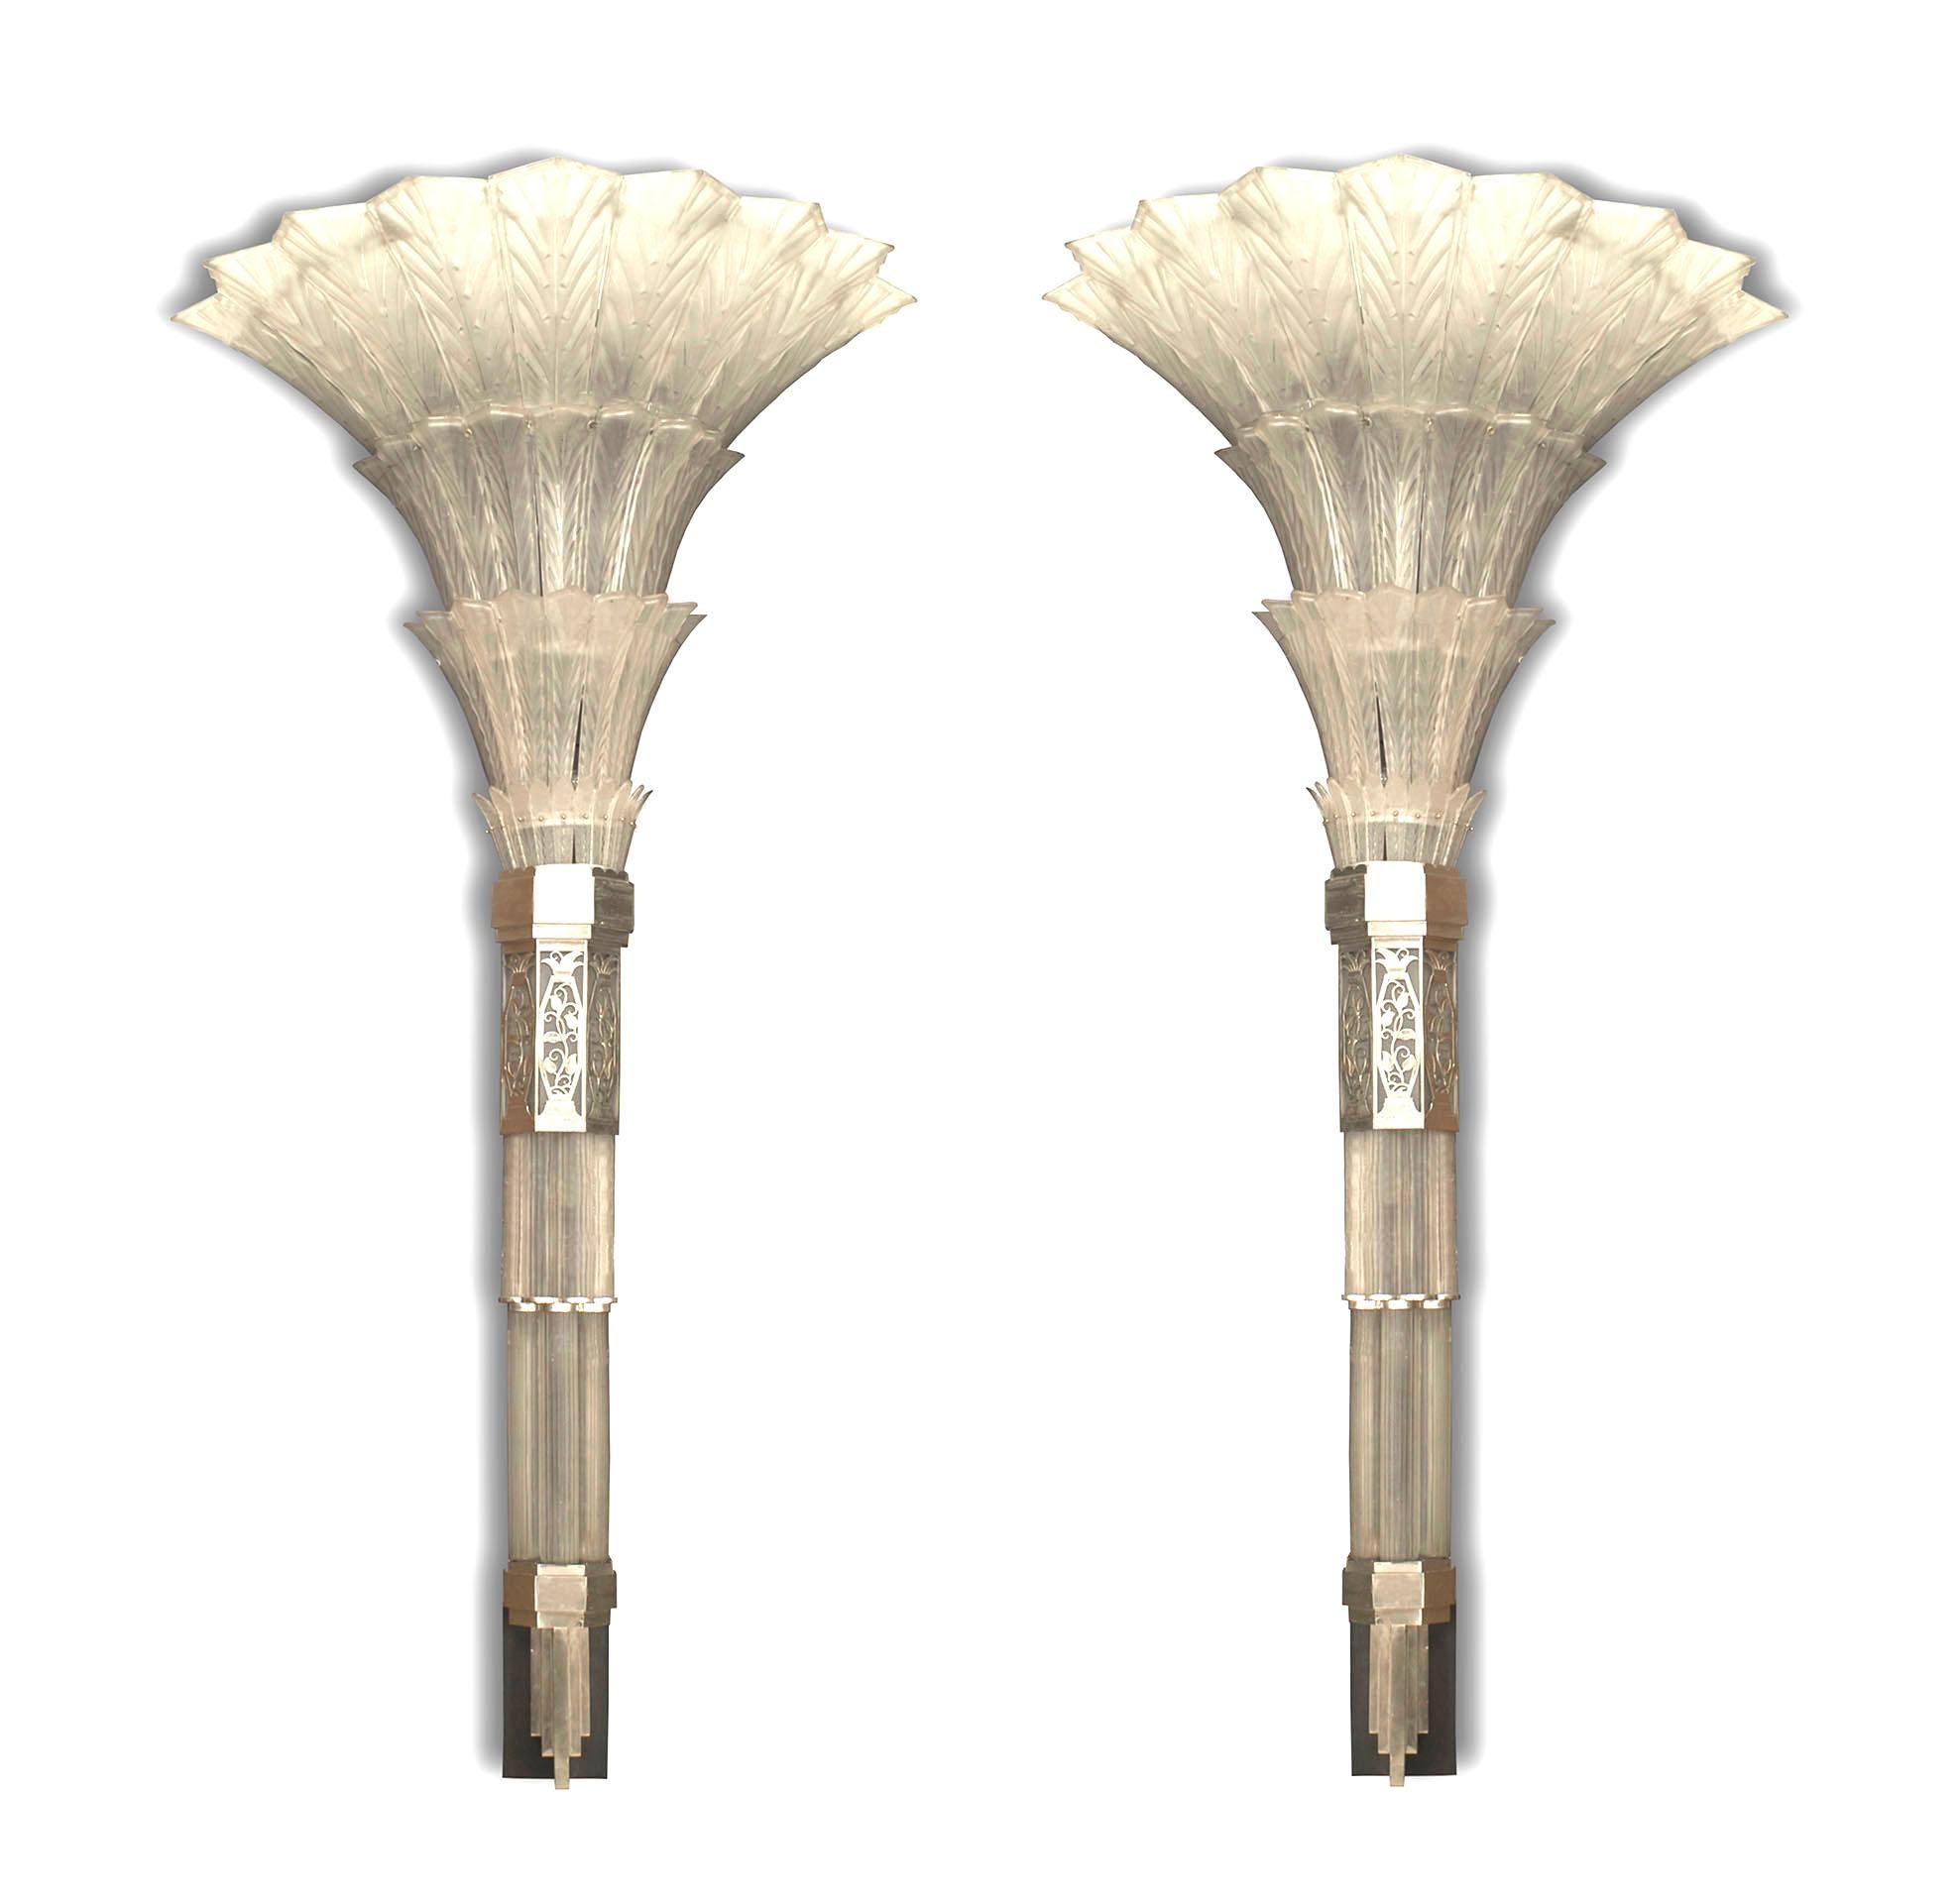 Pair of French Art Deco (1930s) monumental wall sconces with a geometric flared tiered glass panel upper section over a bottom finial beneath a band of chrome plated filigree trim (signed SABINO)
